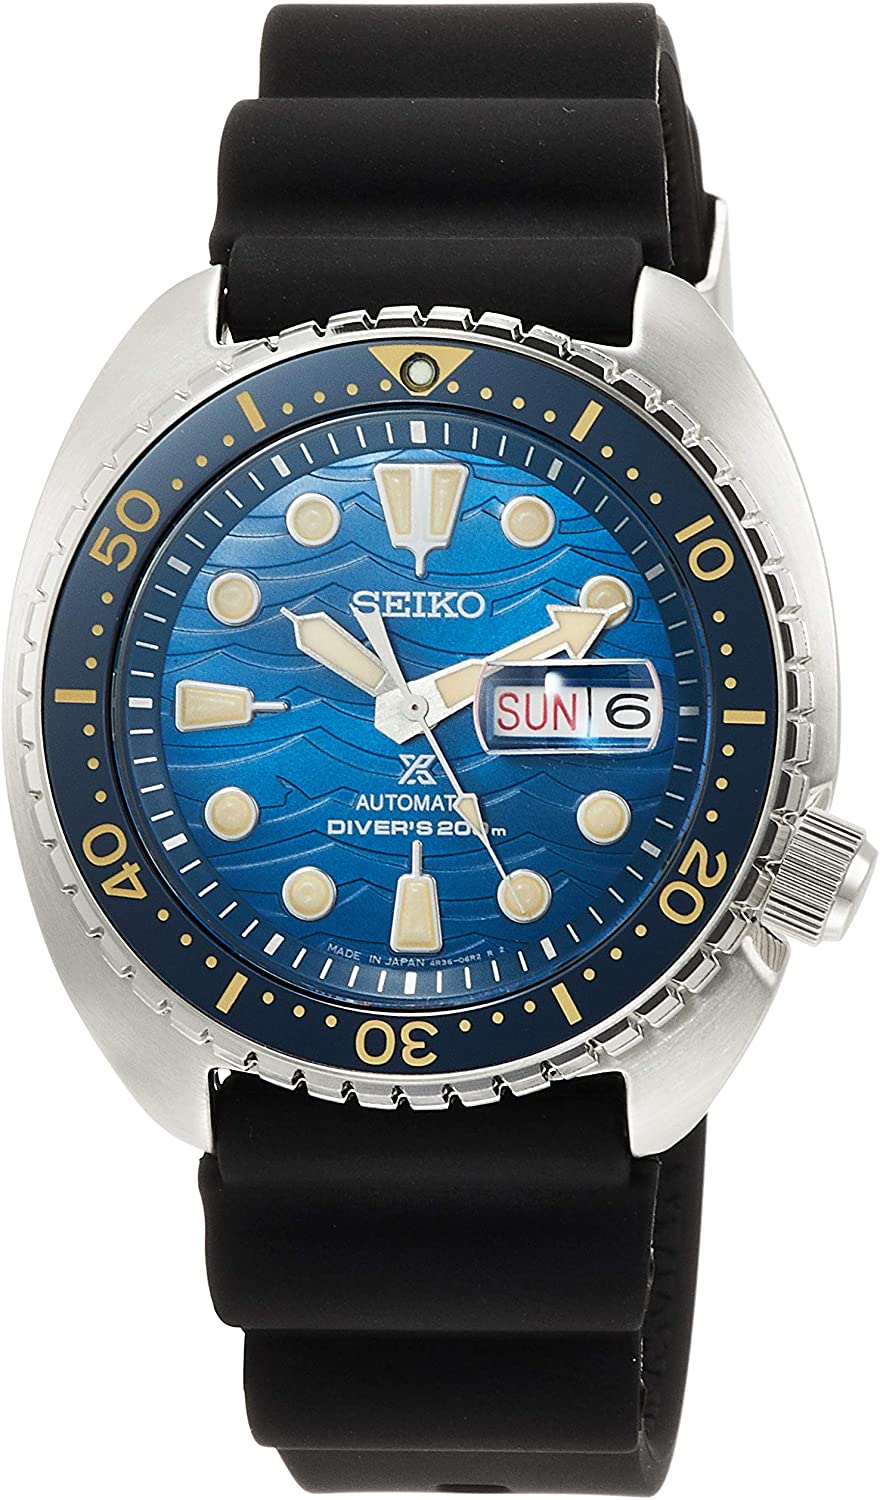 King Turtle Save The Great White Shark - The Seiko Guy